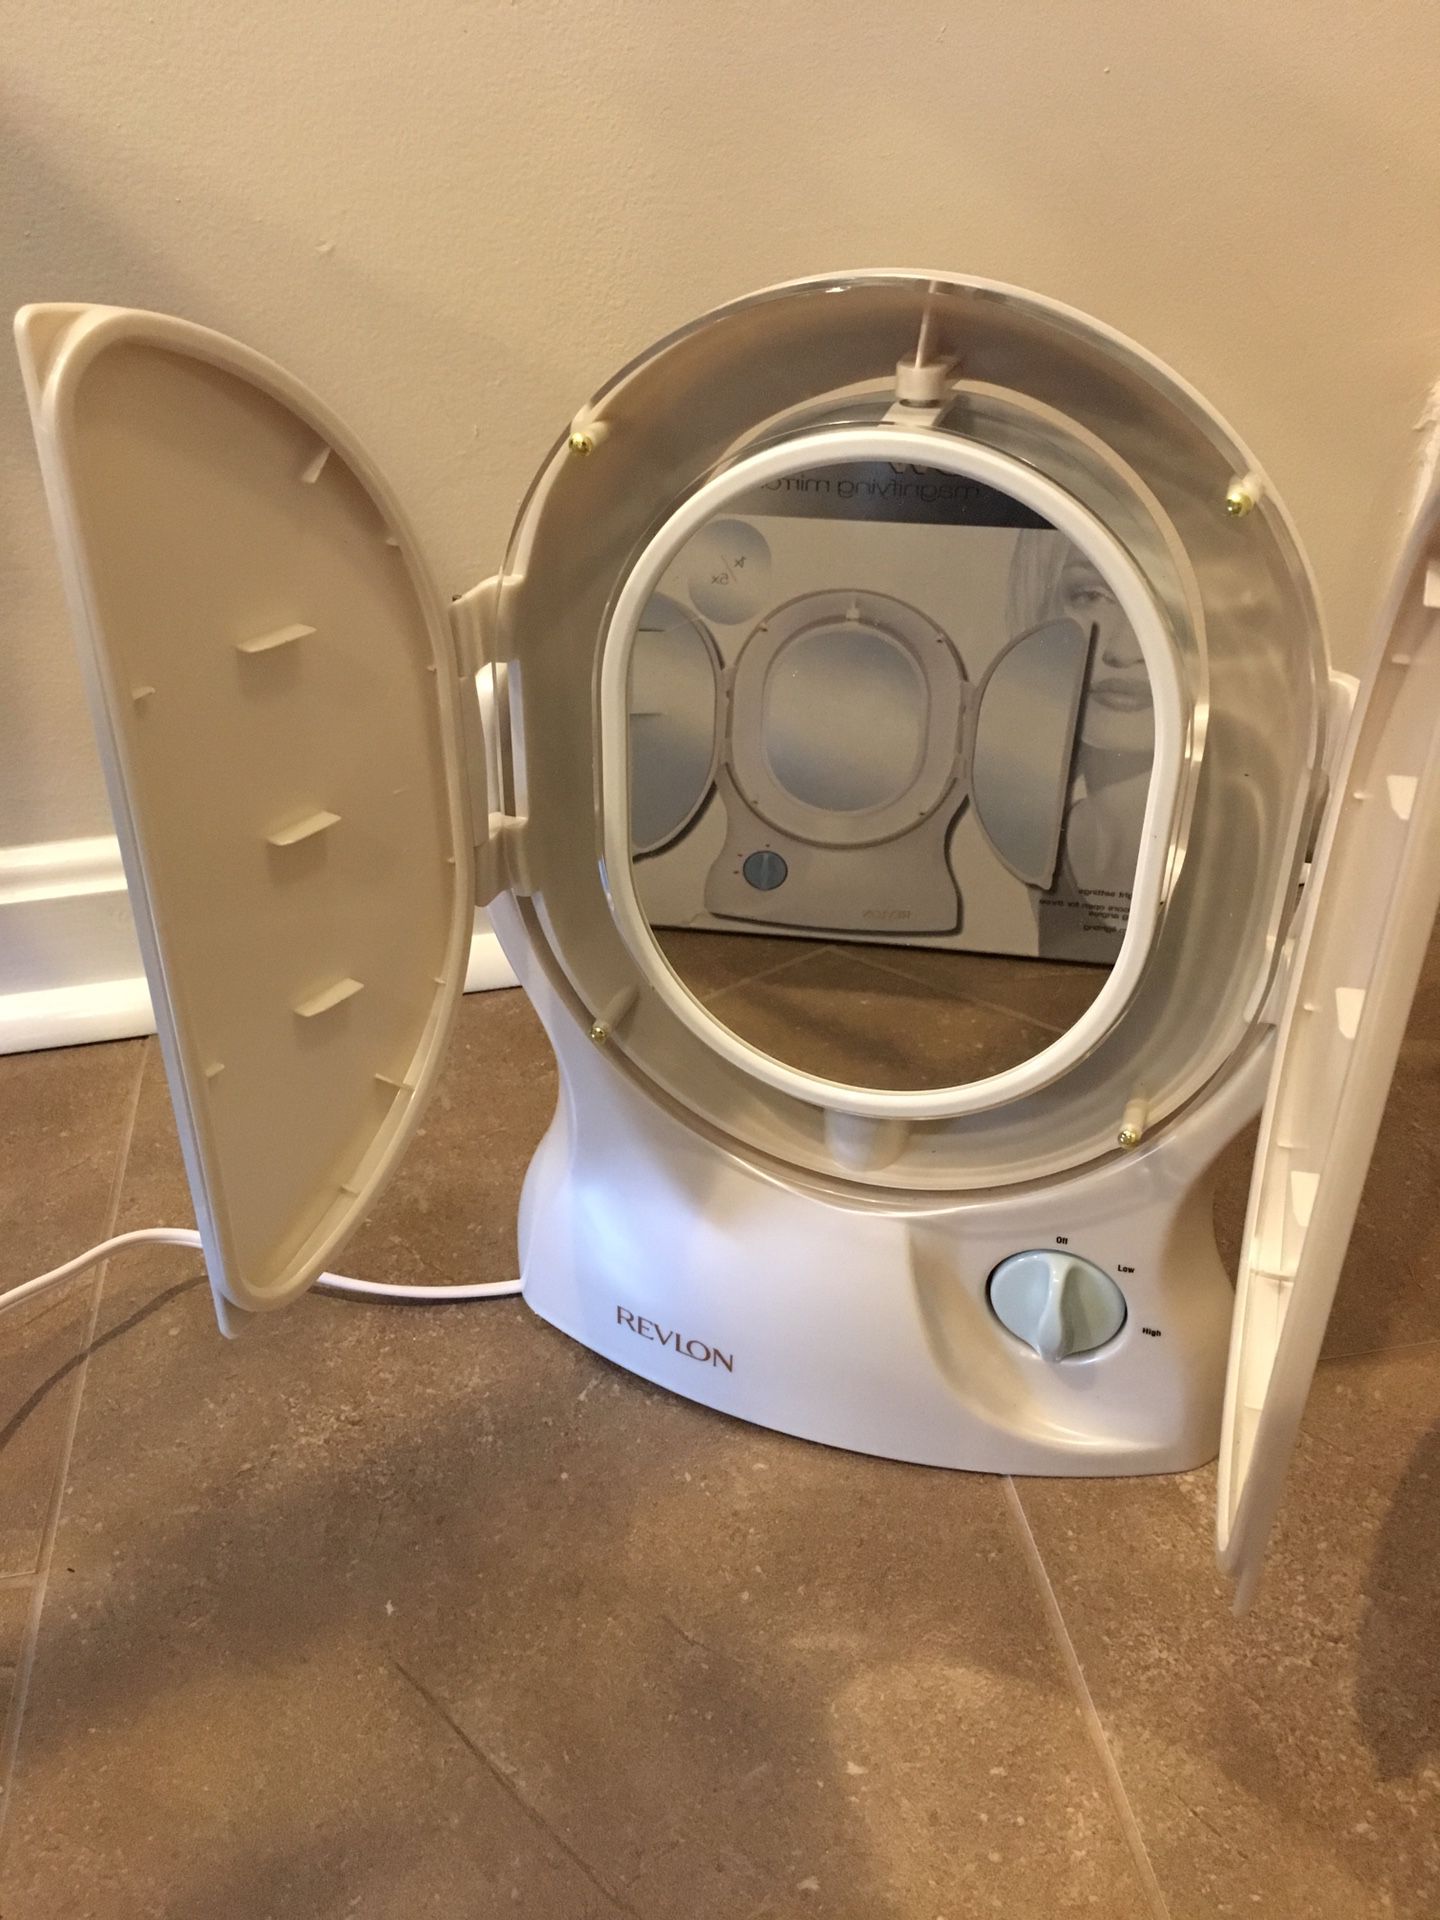 Revlon Makeup Mirror - with lights and magnifies!